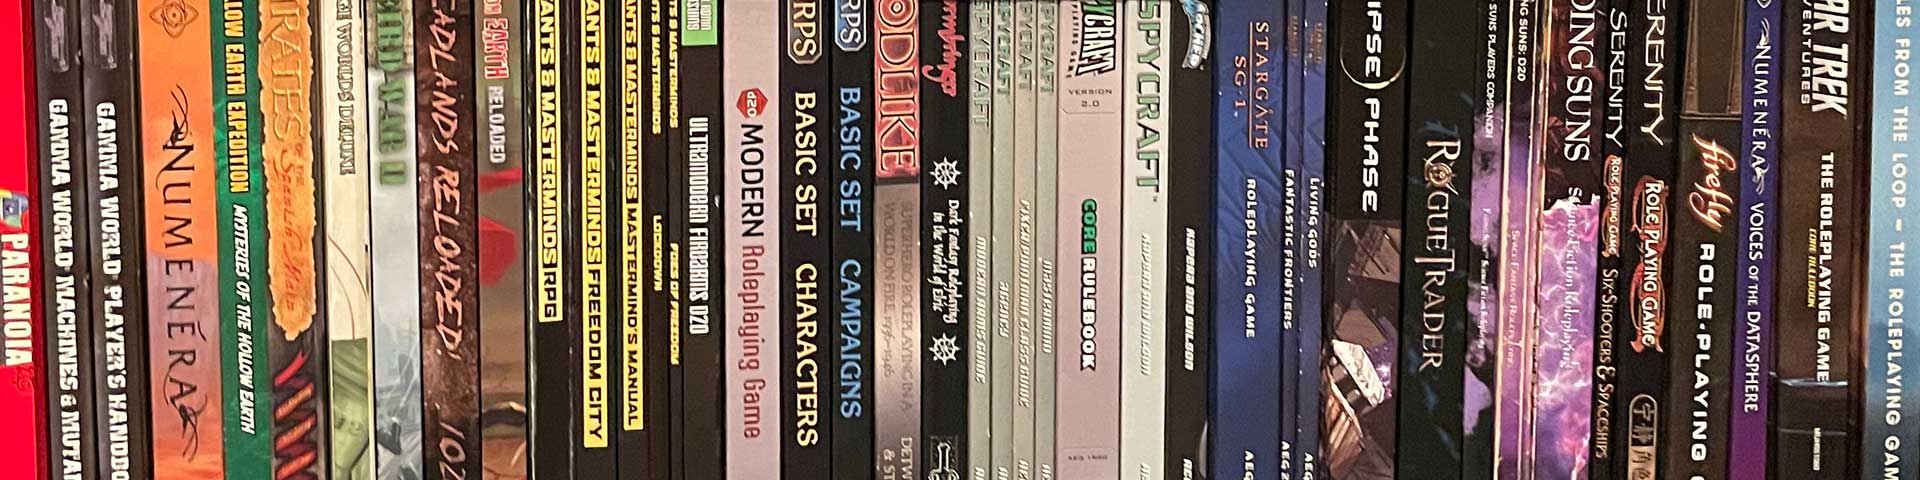 A collection of RPG books on a bookshelf.